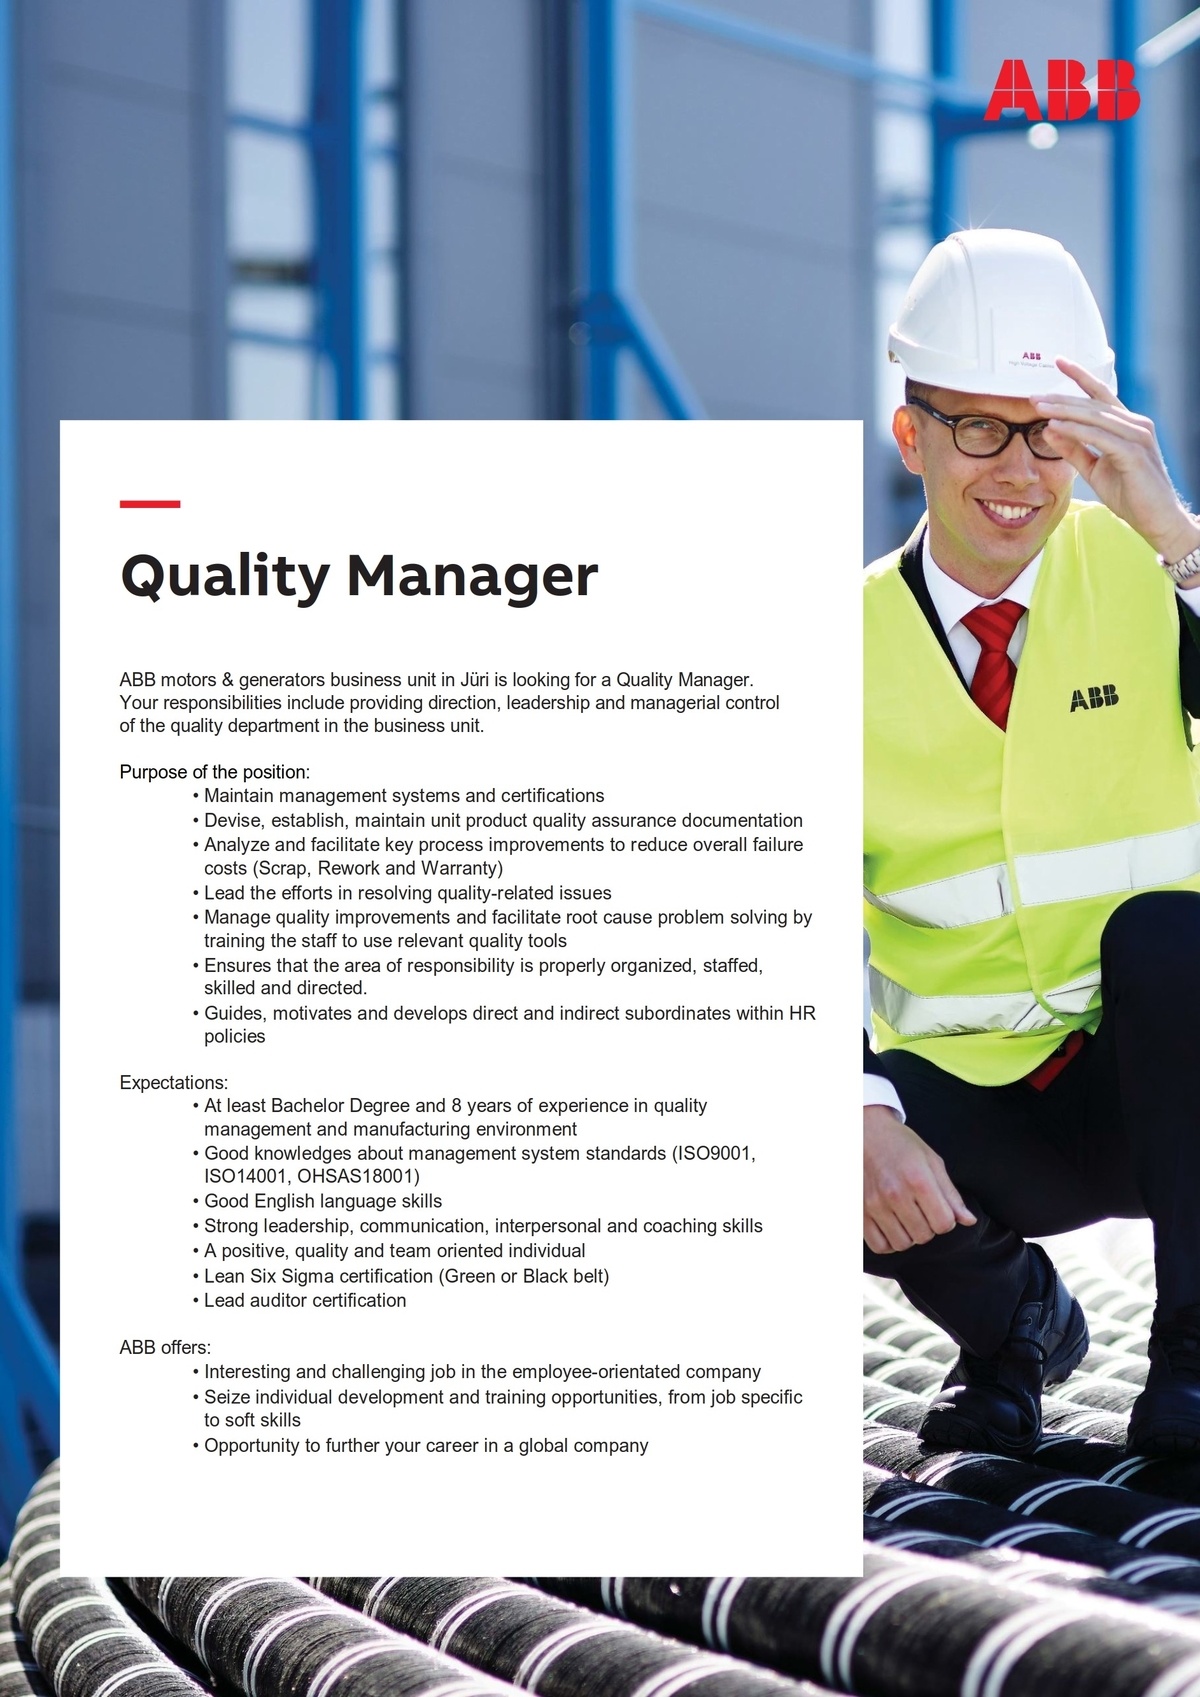 ABB AS Quality Manager